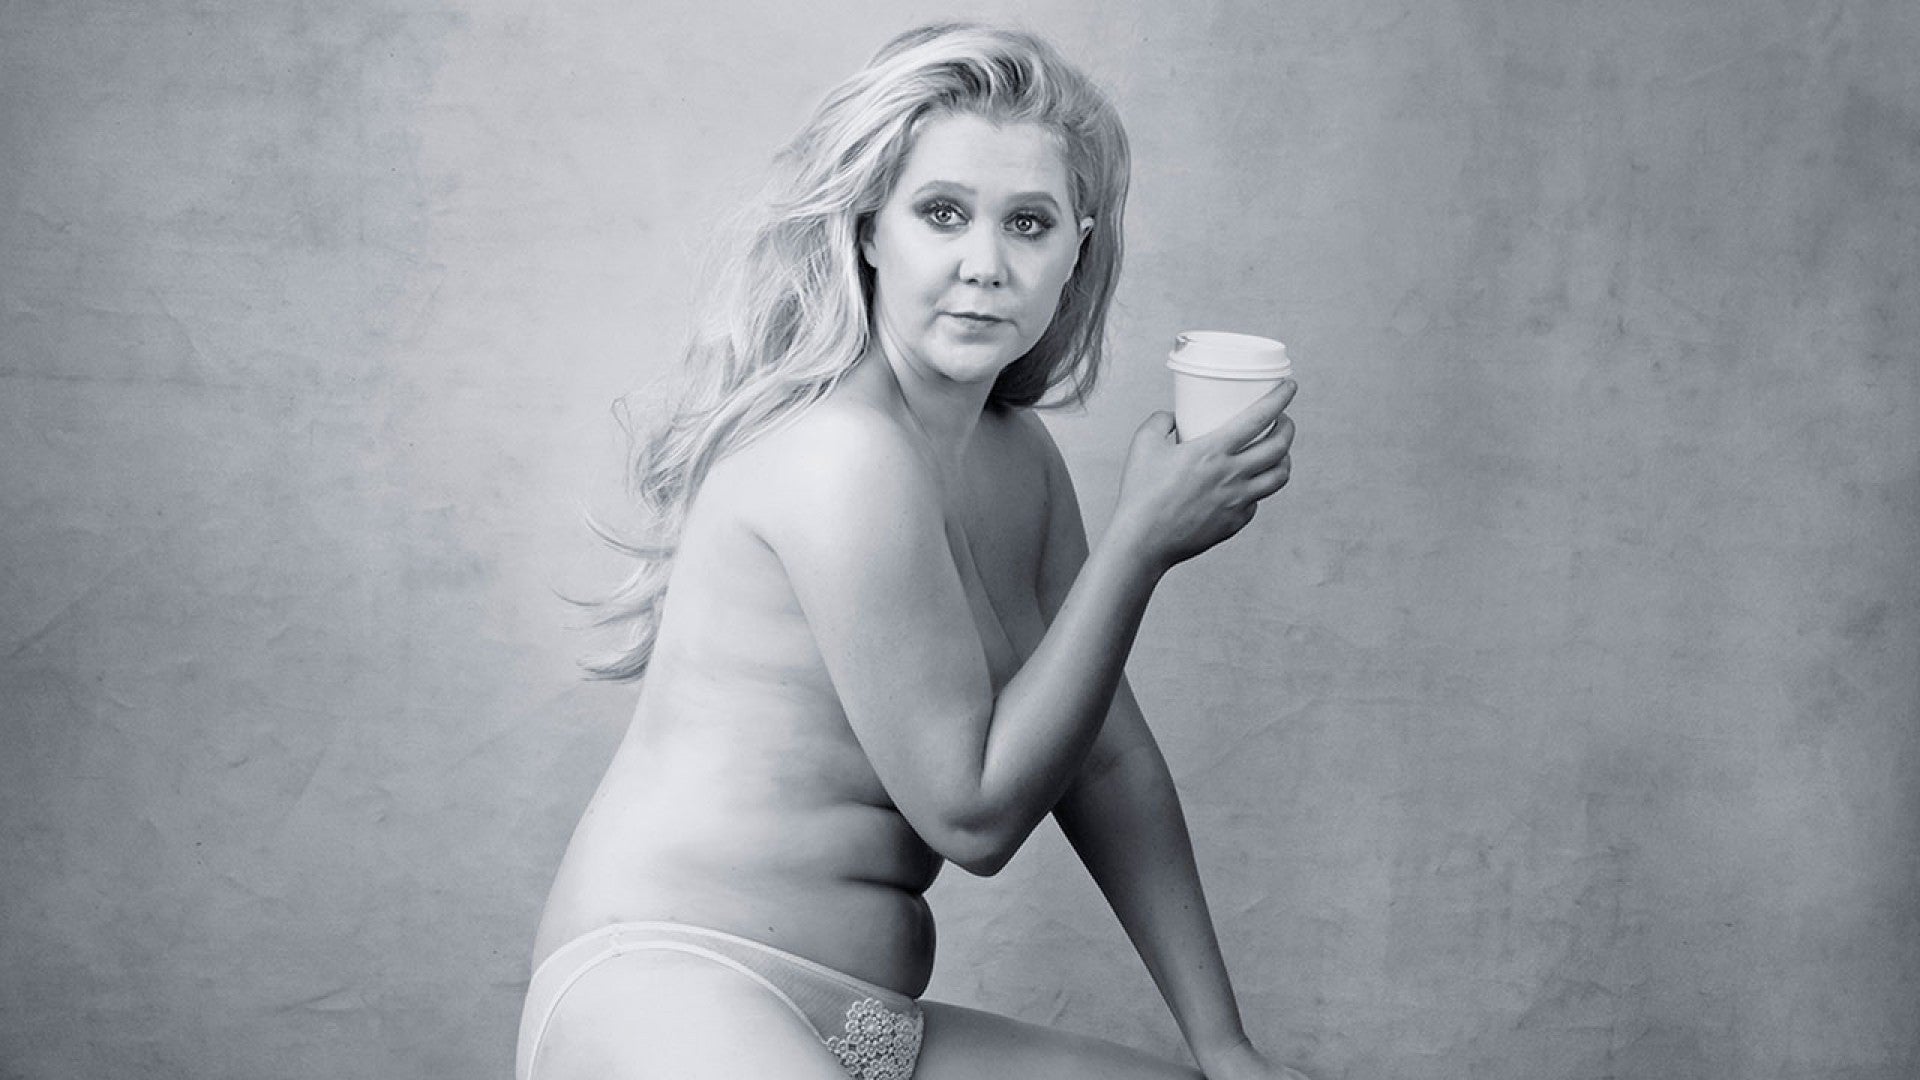 Fat Black Ugly Girls Nude - Amy Schumer Poses Nearly Nude for Pirelli Calendar Photo She ...